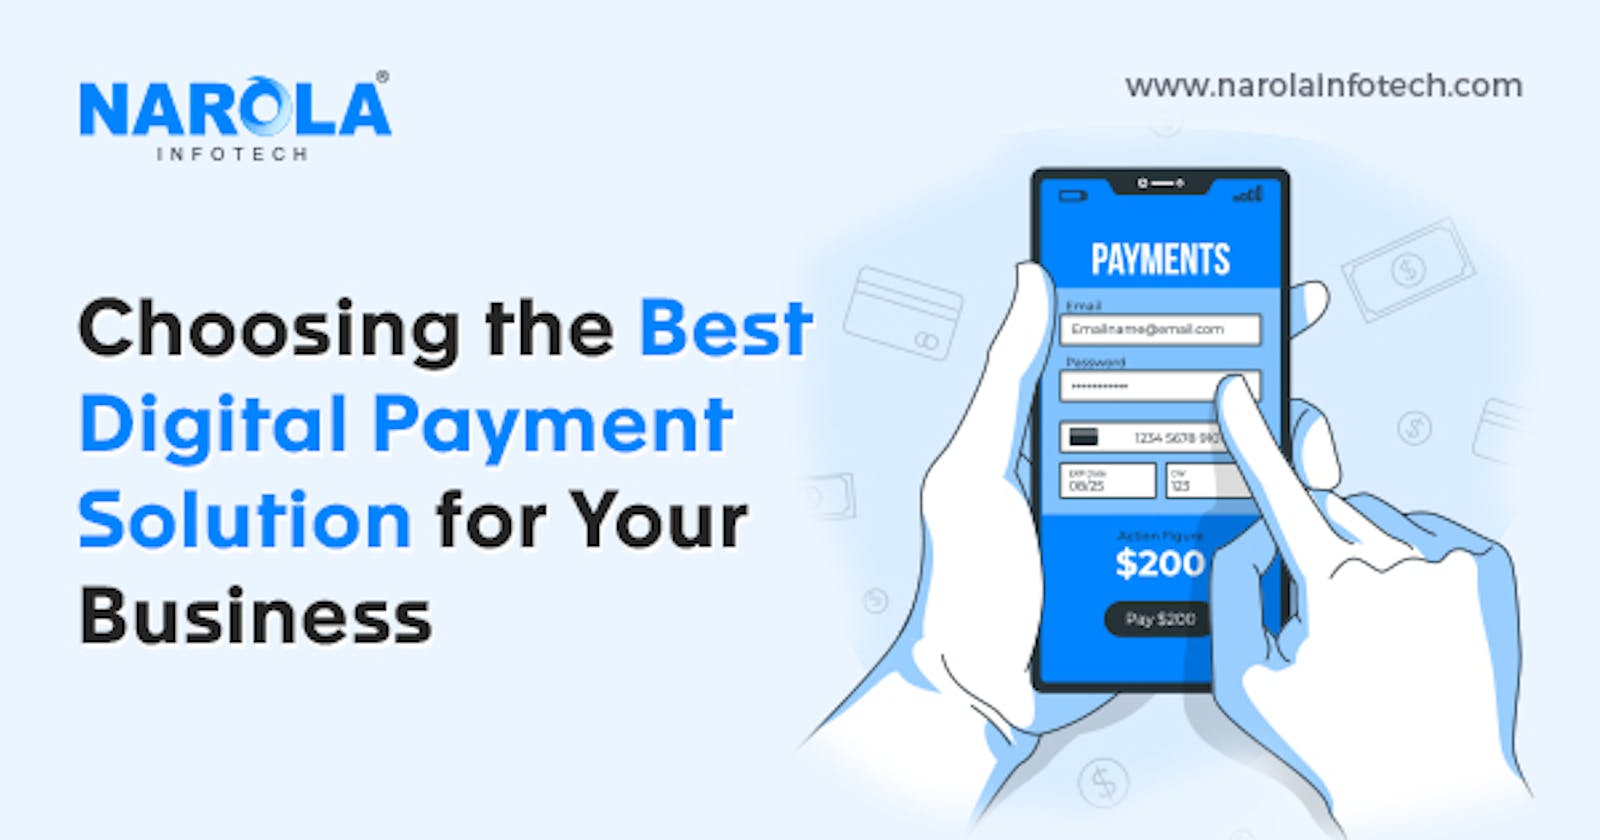 Choosing the Best Digital Payment Solution for Your Business